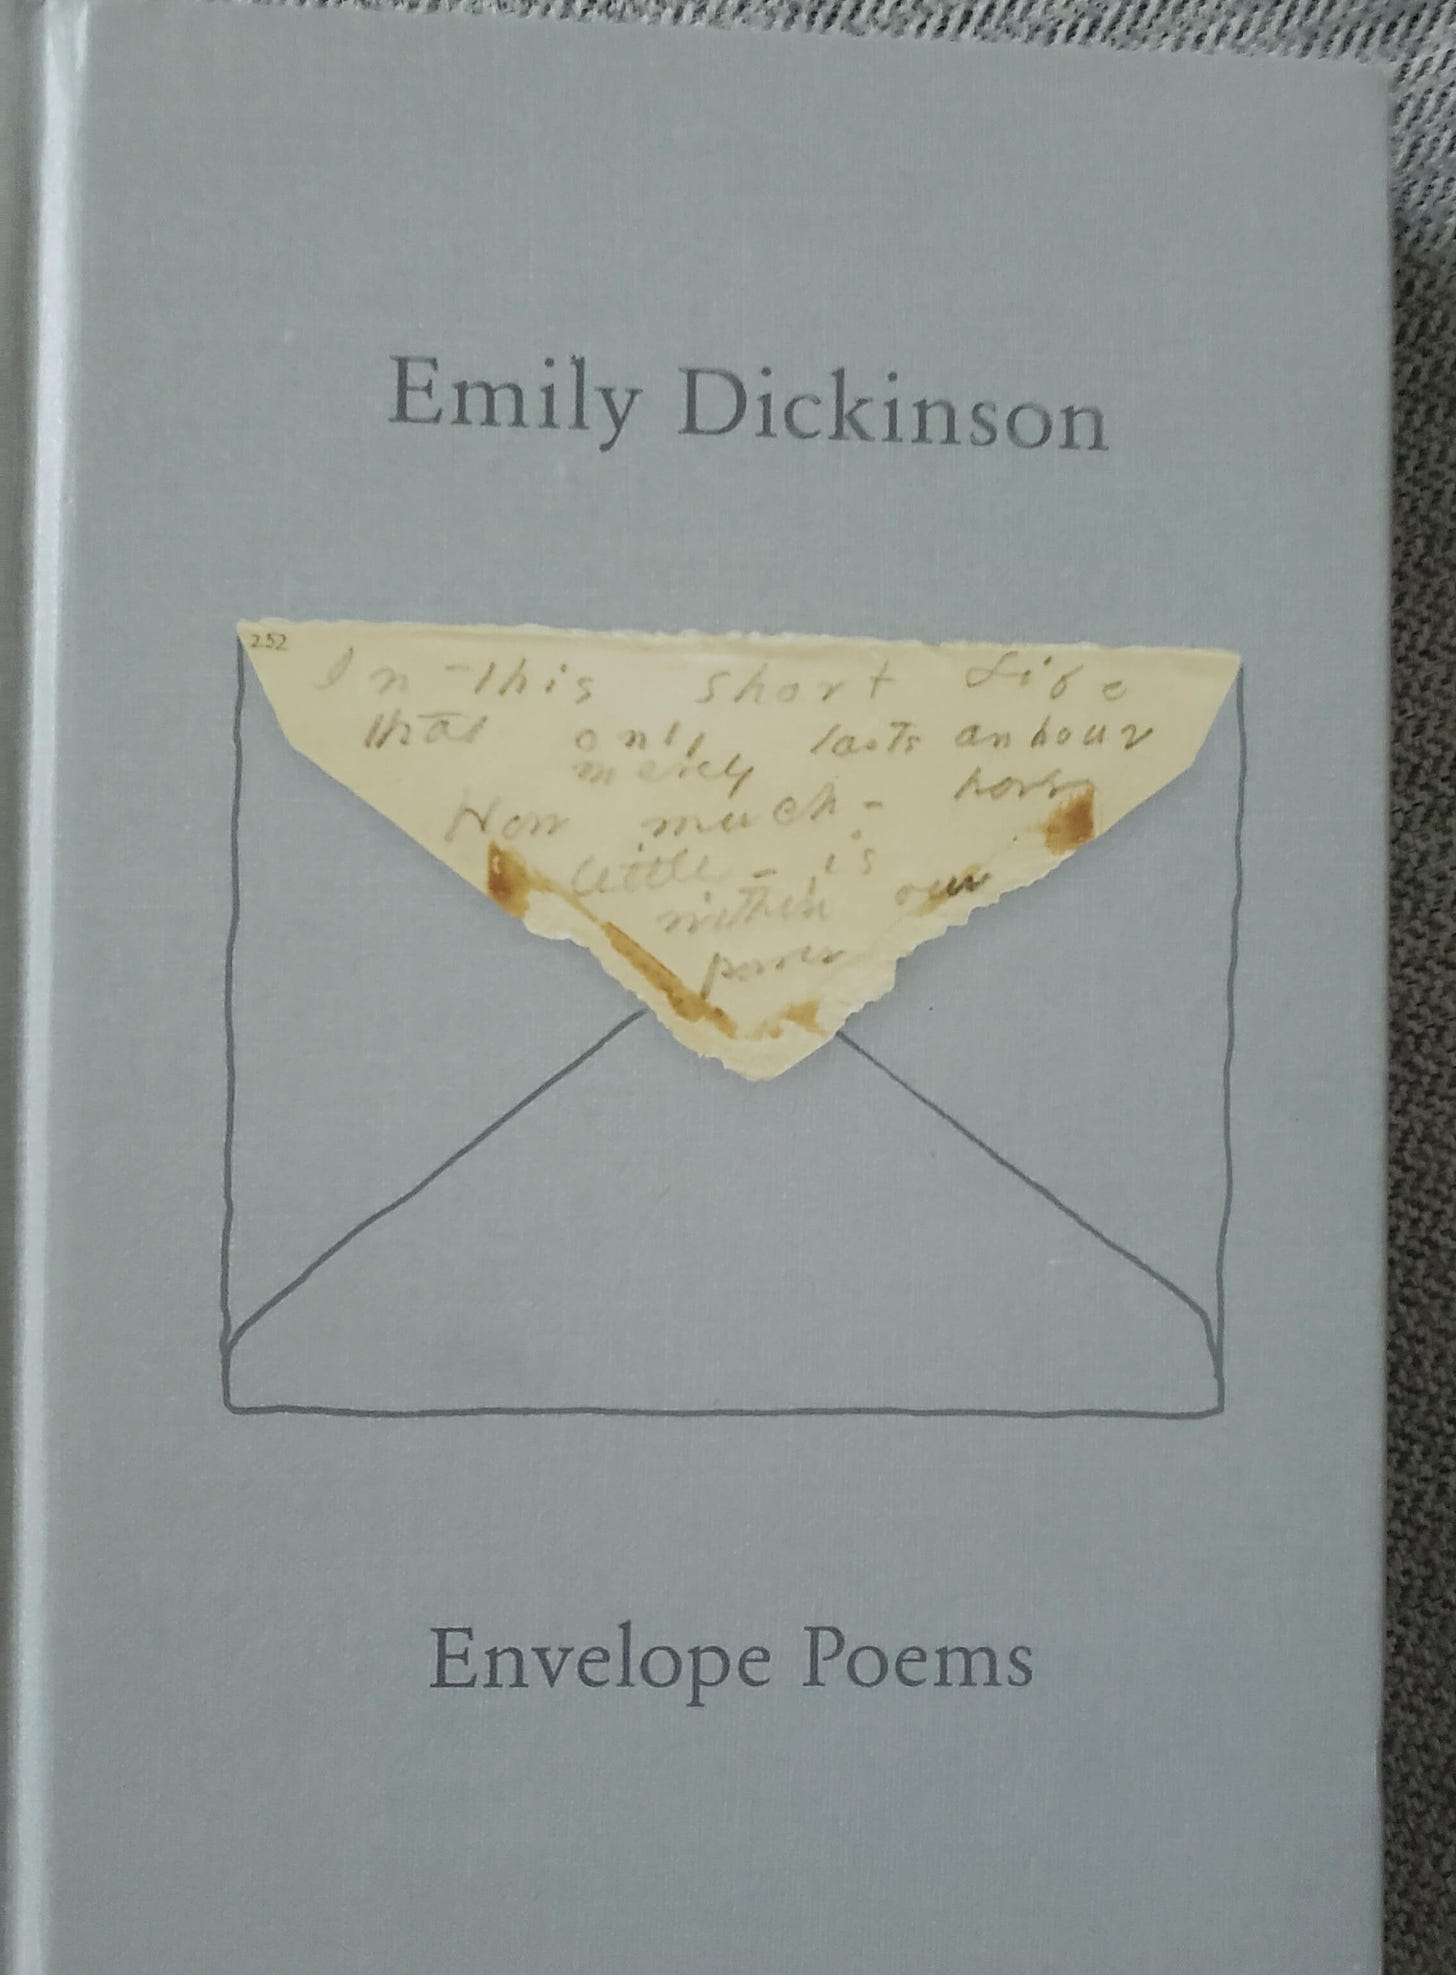 The Envelope Poems book--gray hard cover with the drawing of an envelope in thin black lines. The flap is an image of Dickinson's writing on an envelope flap: In this short life that only lasts an hour how much how little is within our power.